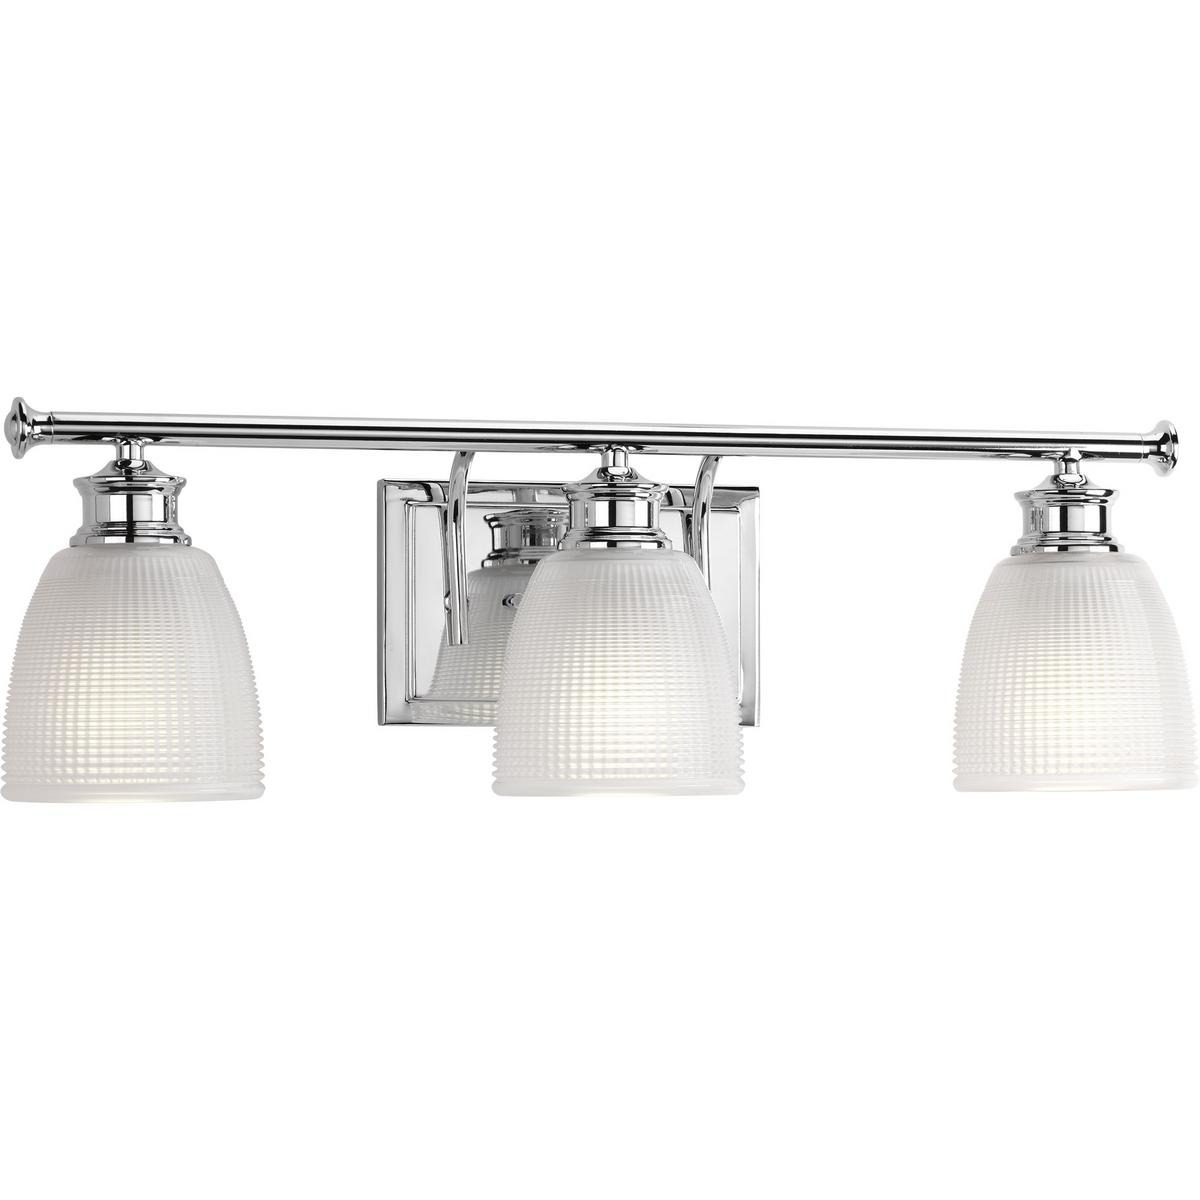 Hubbell P2117-15 Three-light bath from the Lucky Collection, with a distinctive design that evokes a vintage flair with finely crafted details. Light is beautifully illuminated through double prismatic frosted glass shades. Polished Chrome finish.  ; Ideal for a bathroom 